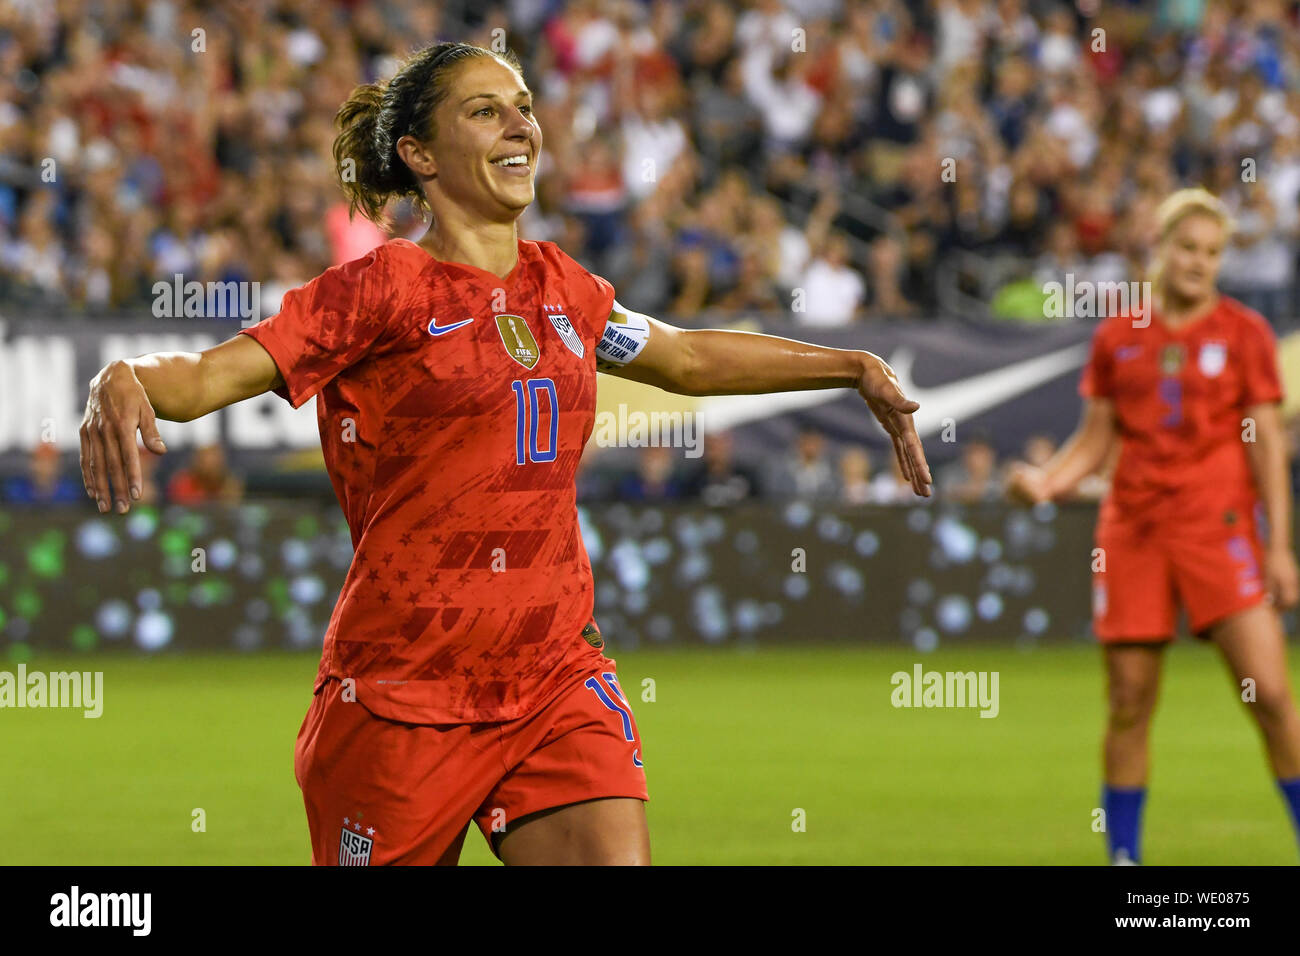 Philadelphia, United States. 29th Aug, 2019. Philadelphia, PA - Carli Lloyd celebrates her goal during the second half of the United States Women's National Team soccer match against Portugal. The USWNT won 4-0 during their World Cup victory tour. Credit: Don Mennig/Alamy Live News Stock Photo